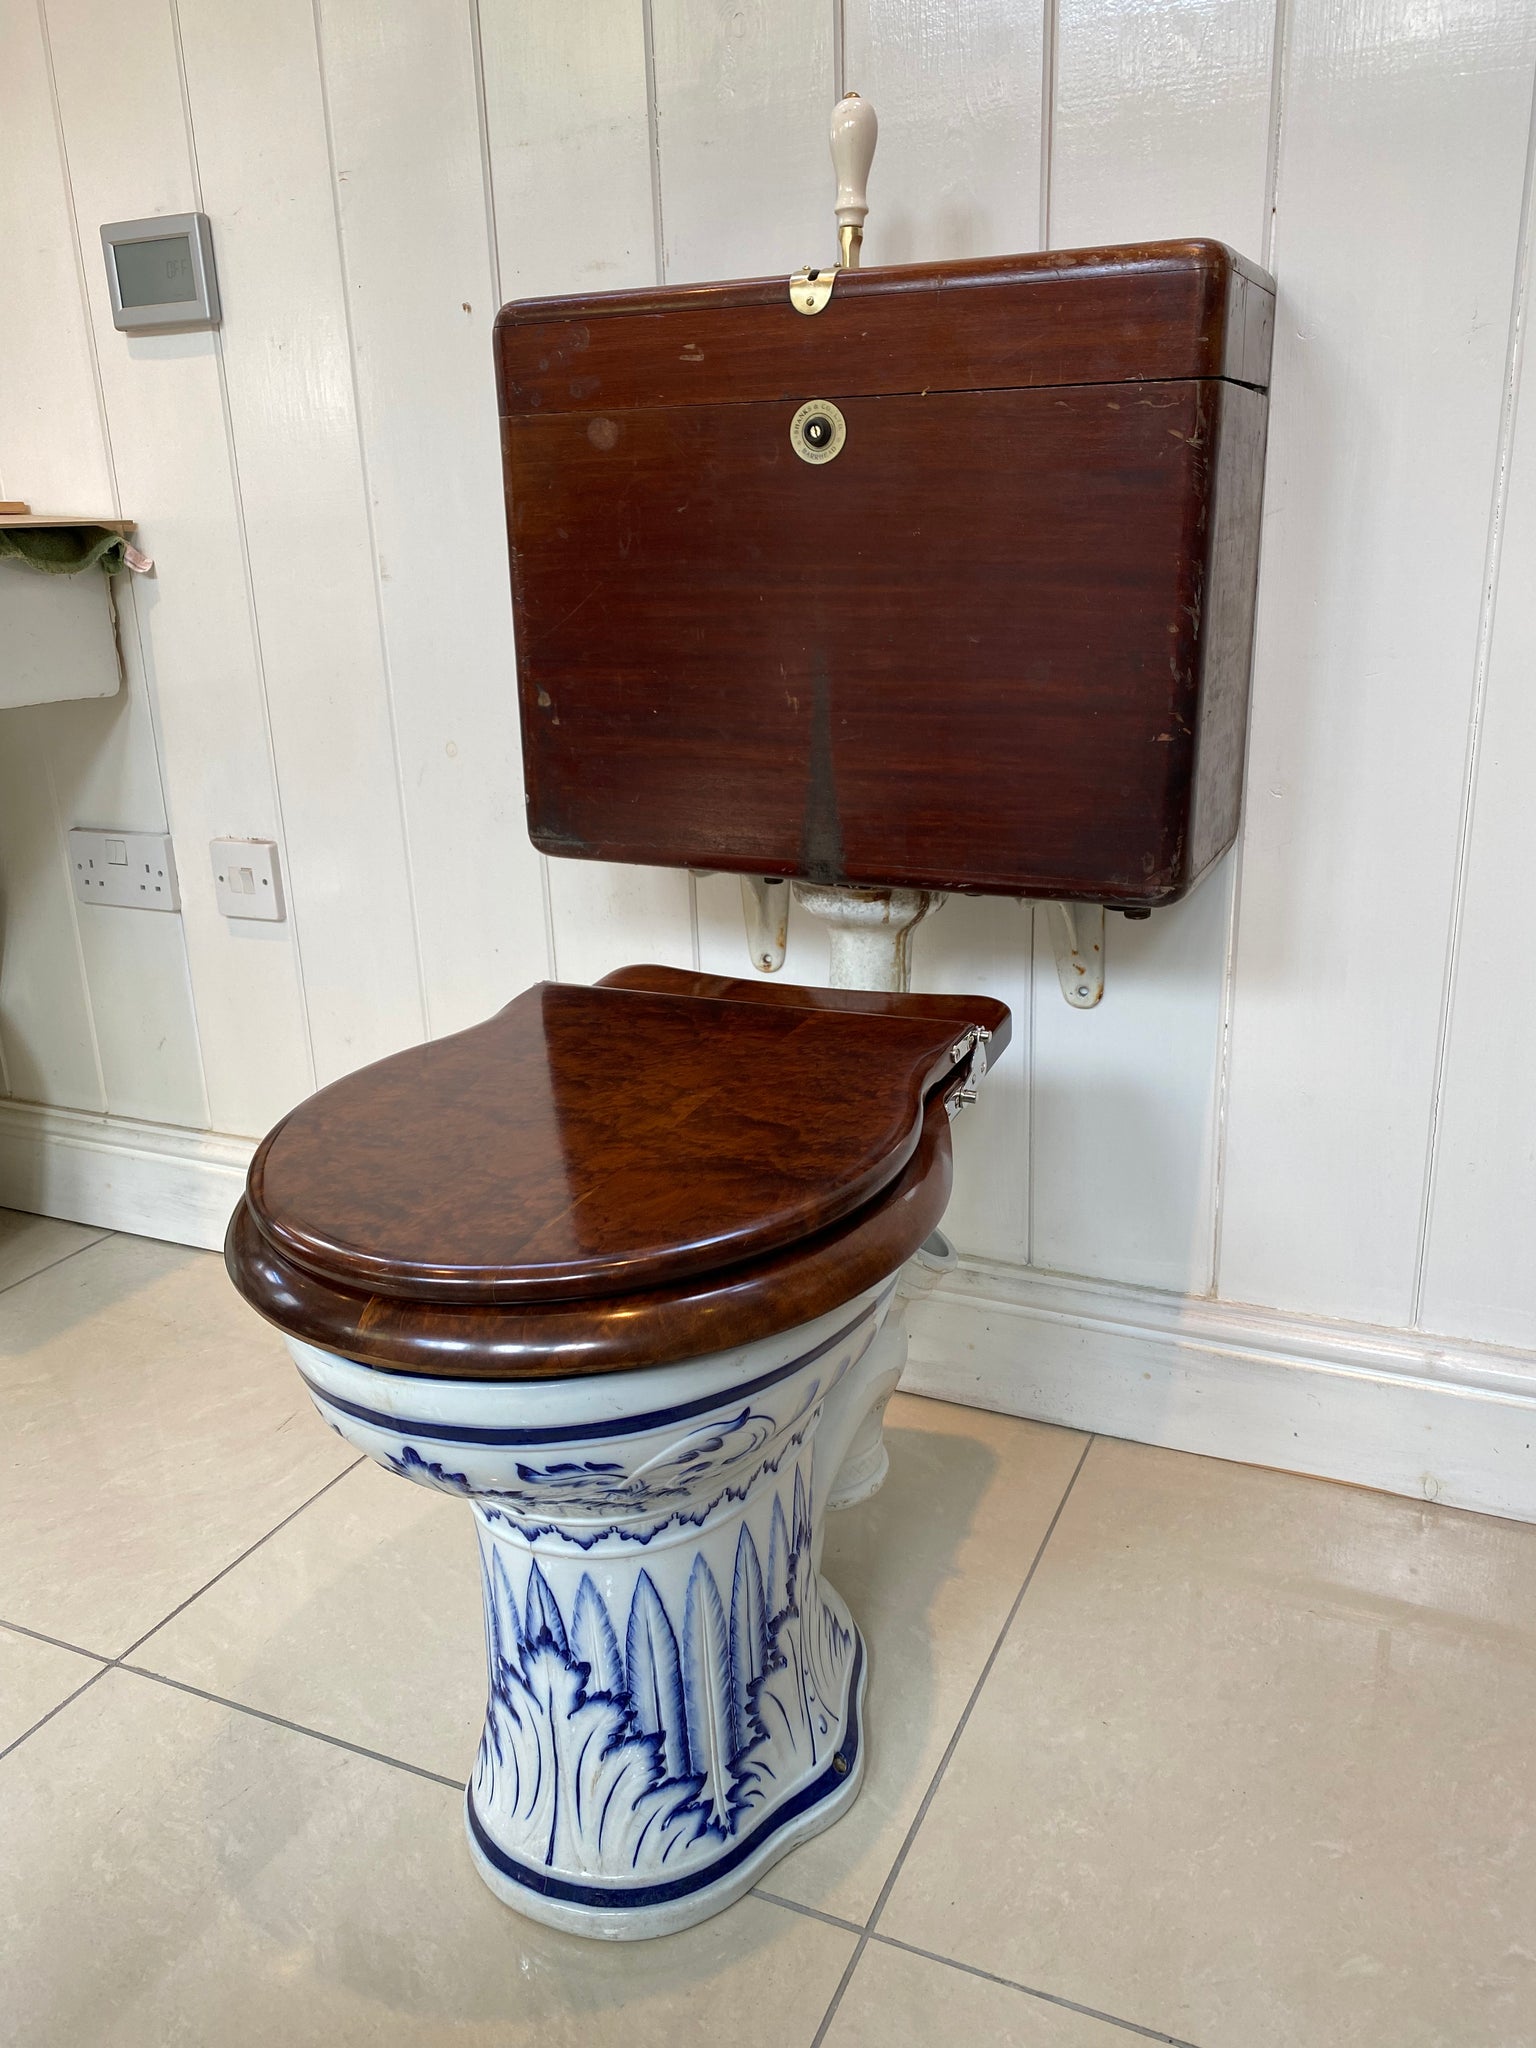 shanks compactum wc and copper-lined mahogany cistern c.1900